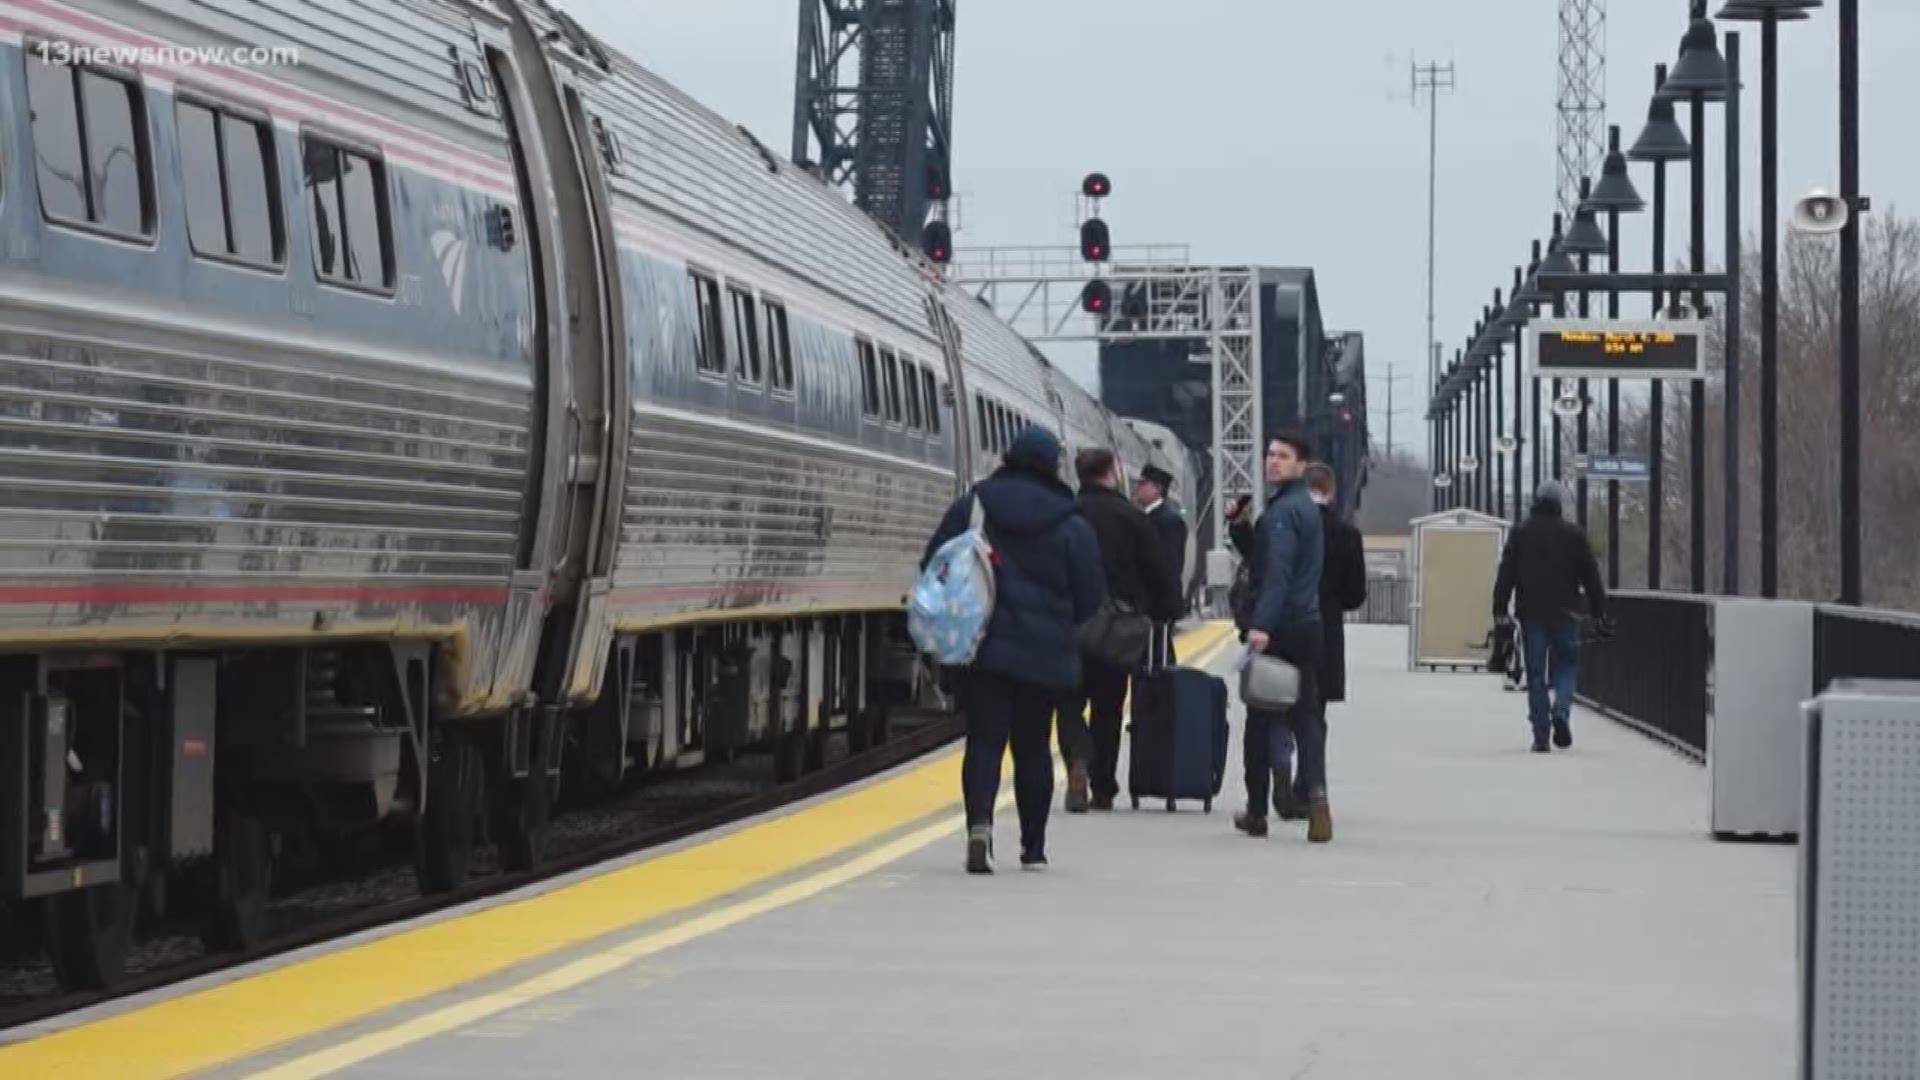 The Commonwealth of Virginia is offering $10 tickets for travel Oct. 1 - Oct. 10 anywhere Amtrak Northeast Regional travels throughout Virginia and D.C.